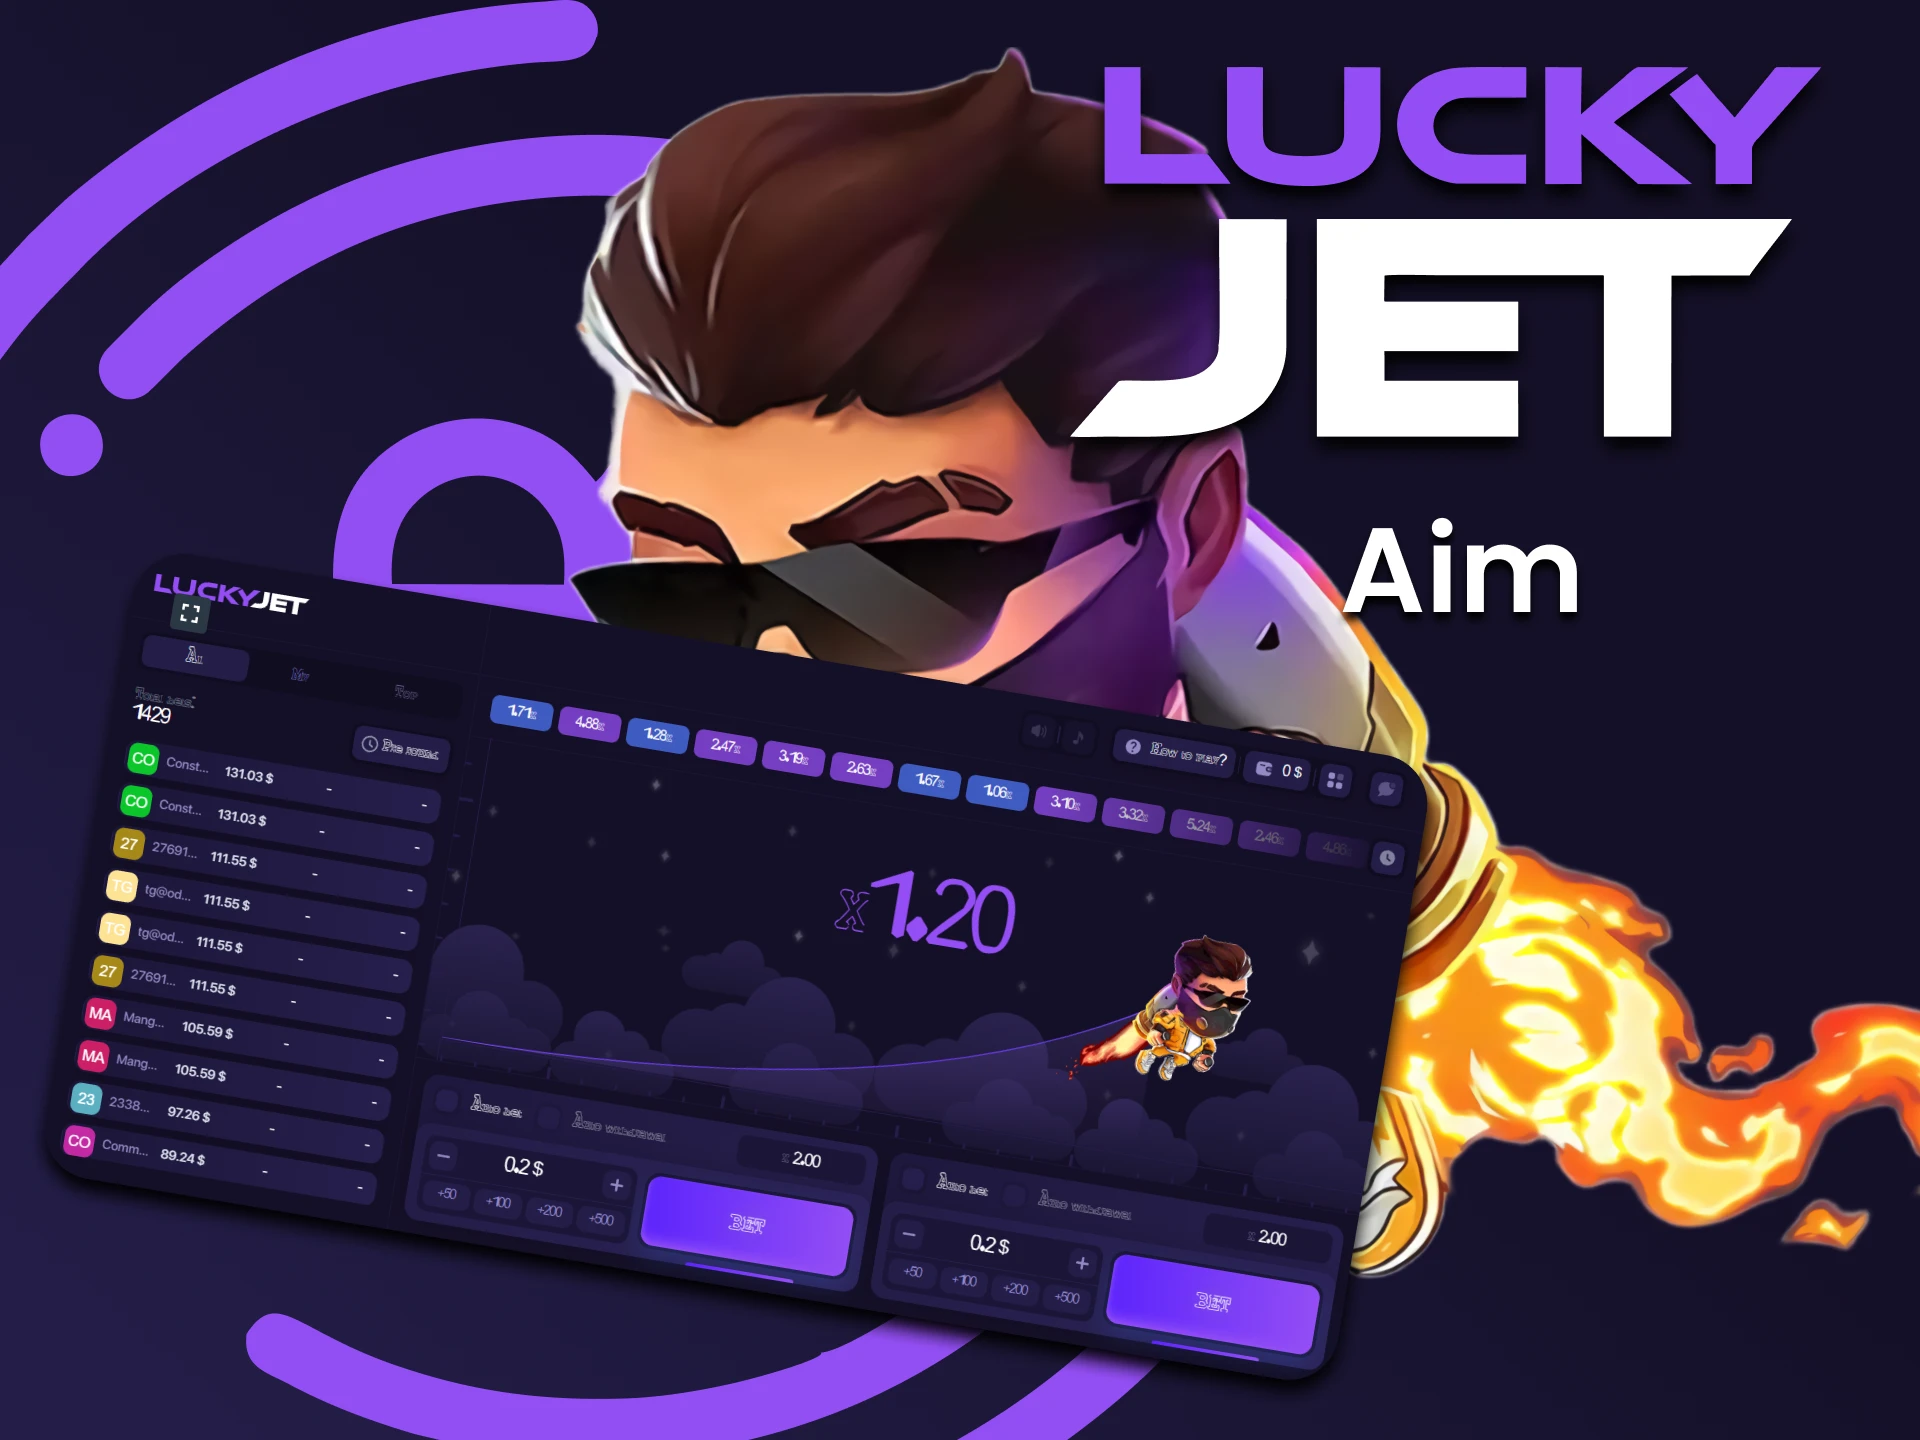 The goal of Lucky Jet gambling game is to manage to withdraw your bet before Lucky Joe flies away.